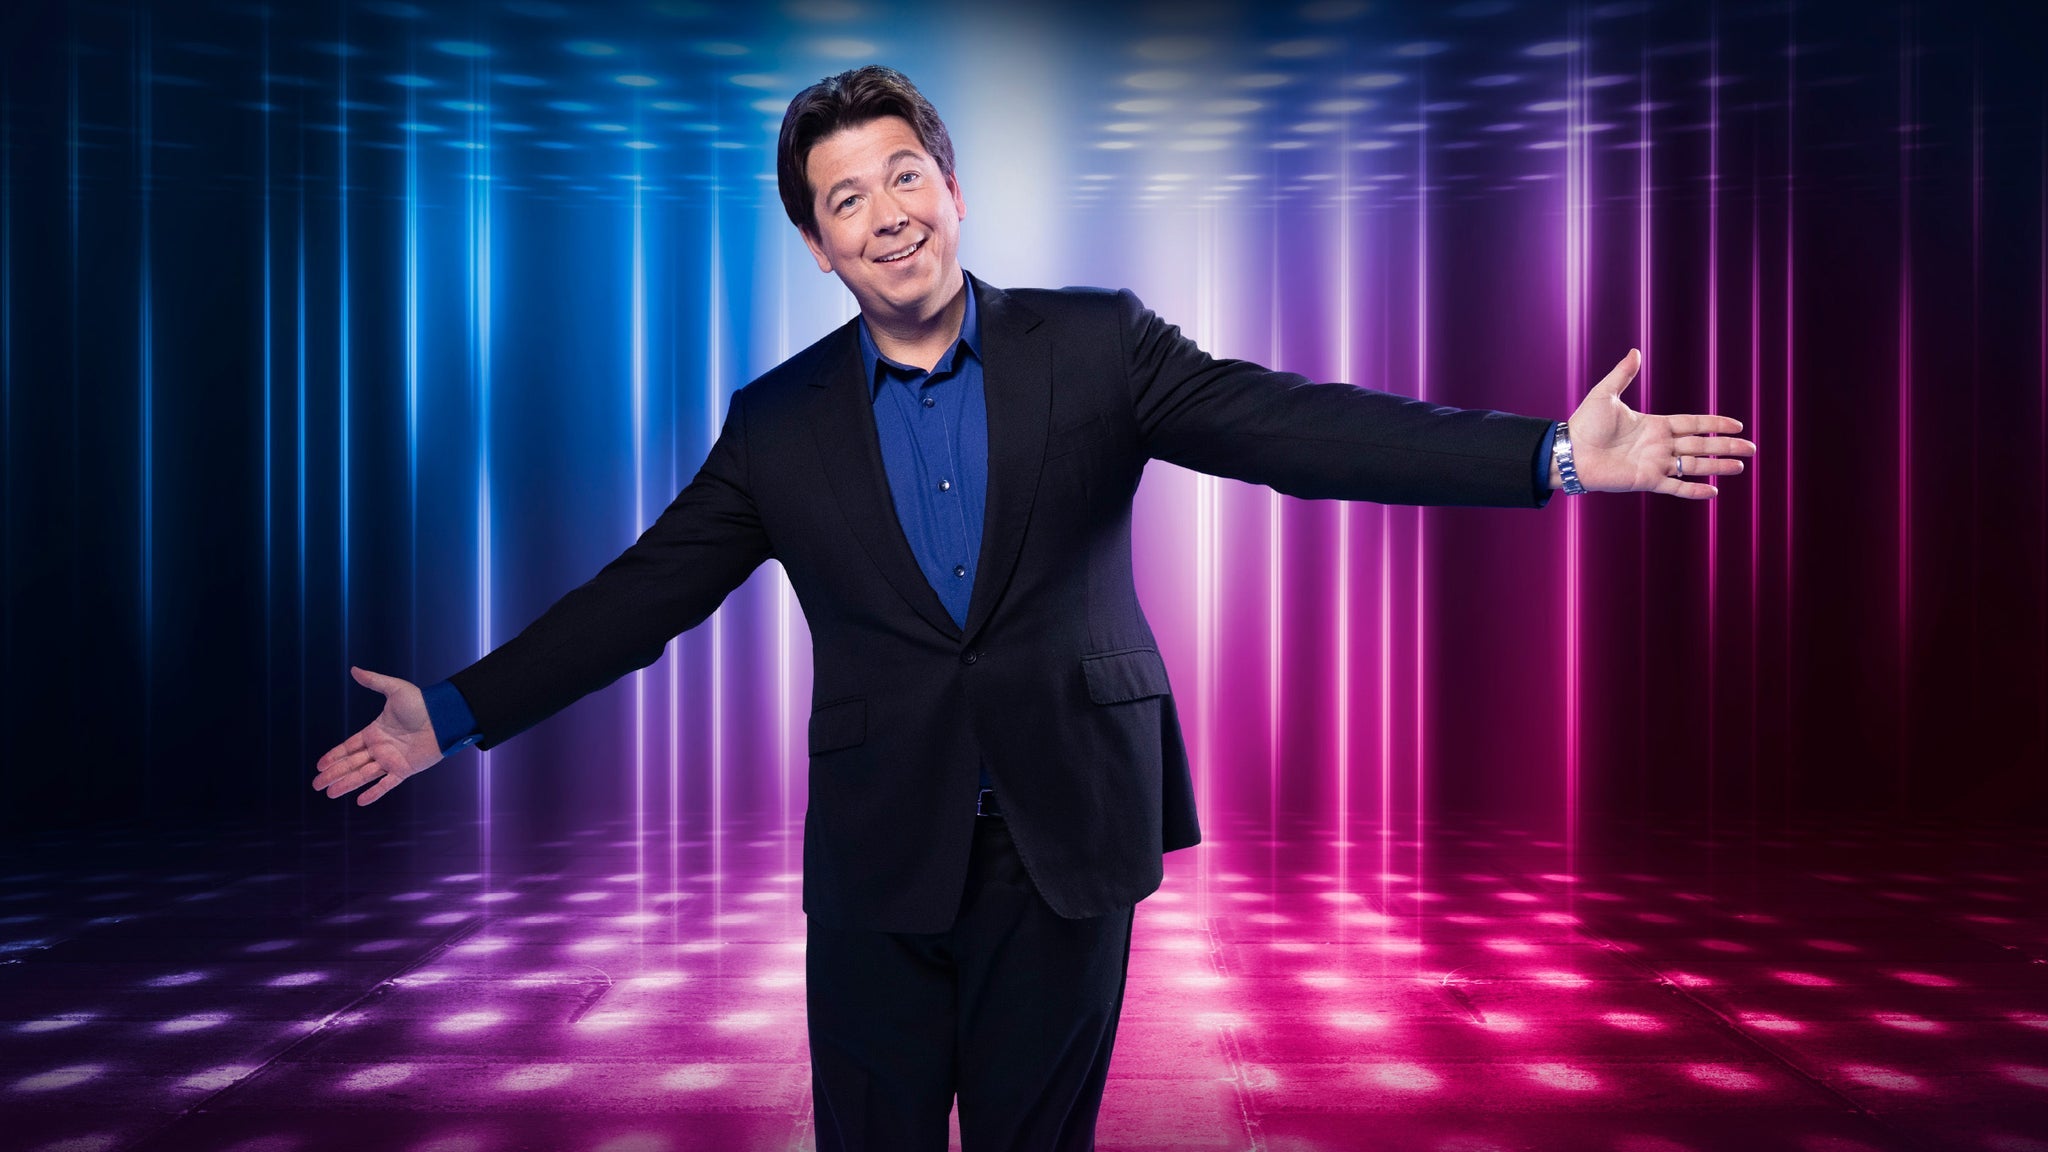 Image used with permission from Ticketmaster | Michael McIntyre - Jet-Lagged and Jolly tickets